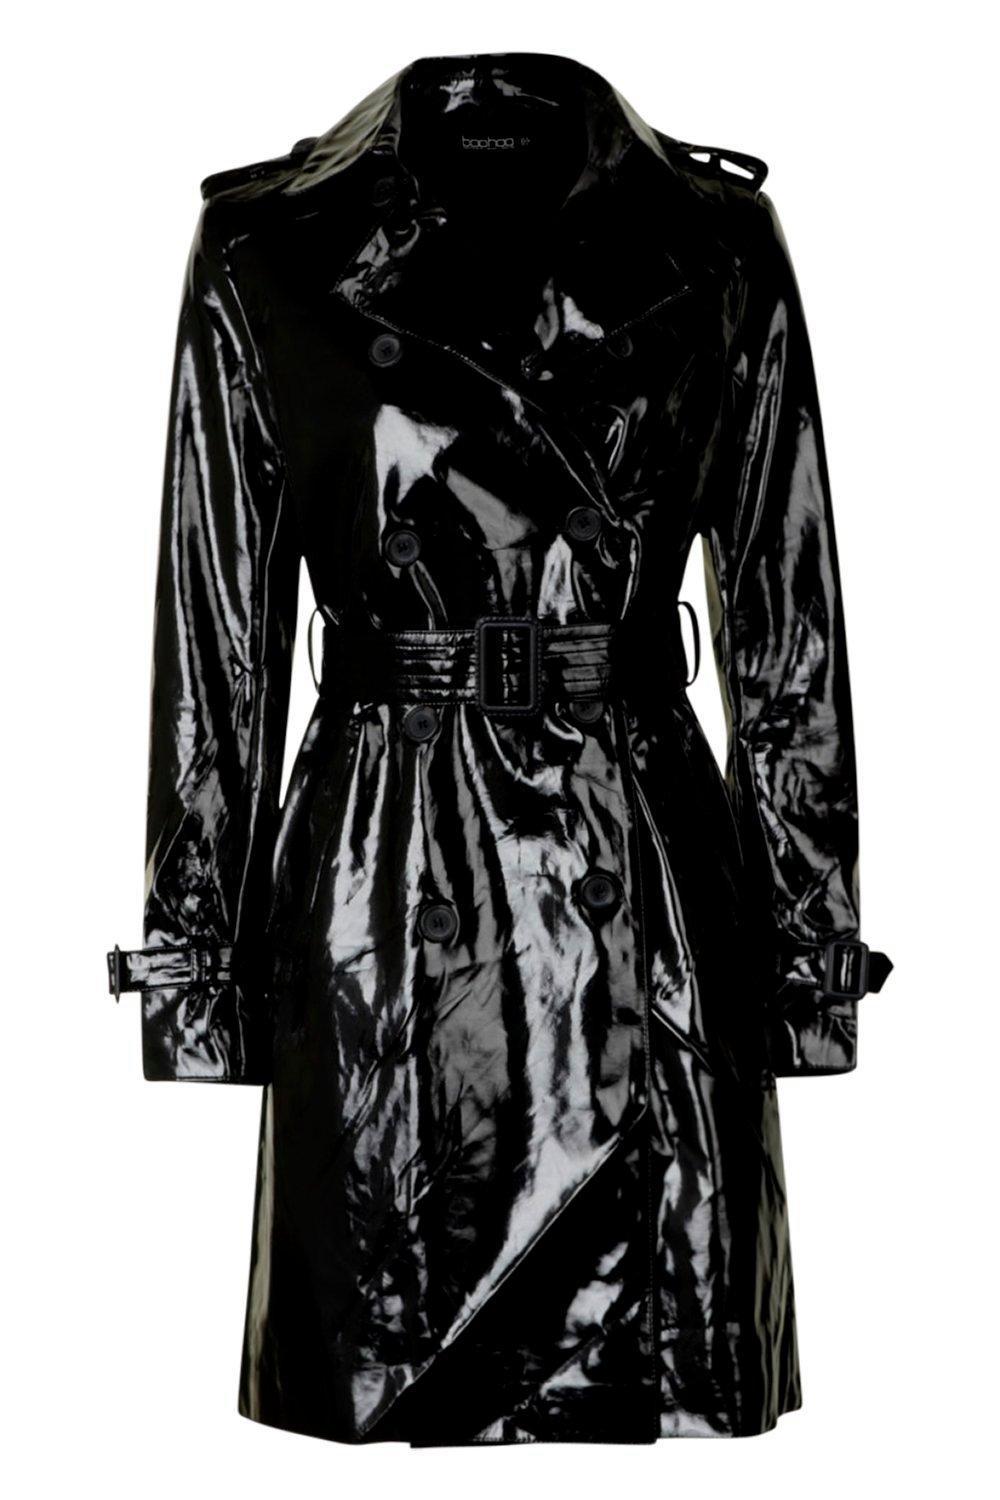 Boohoo Denim Pvc Belted Trench Coat in Black - Lyst